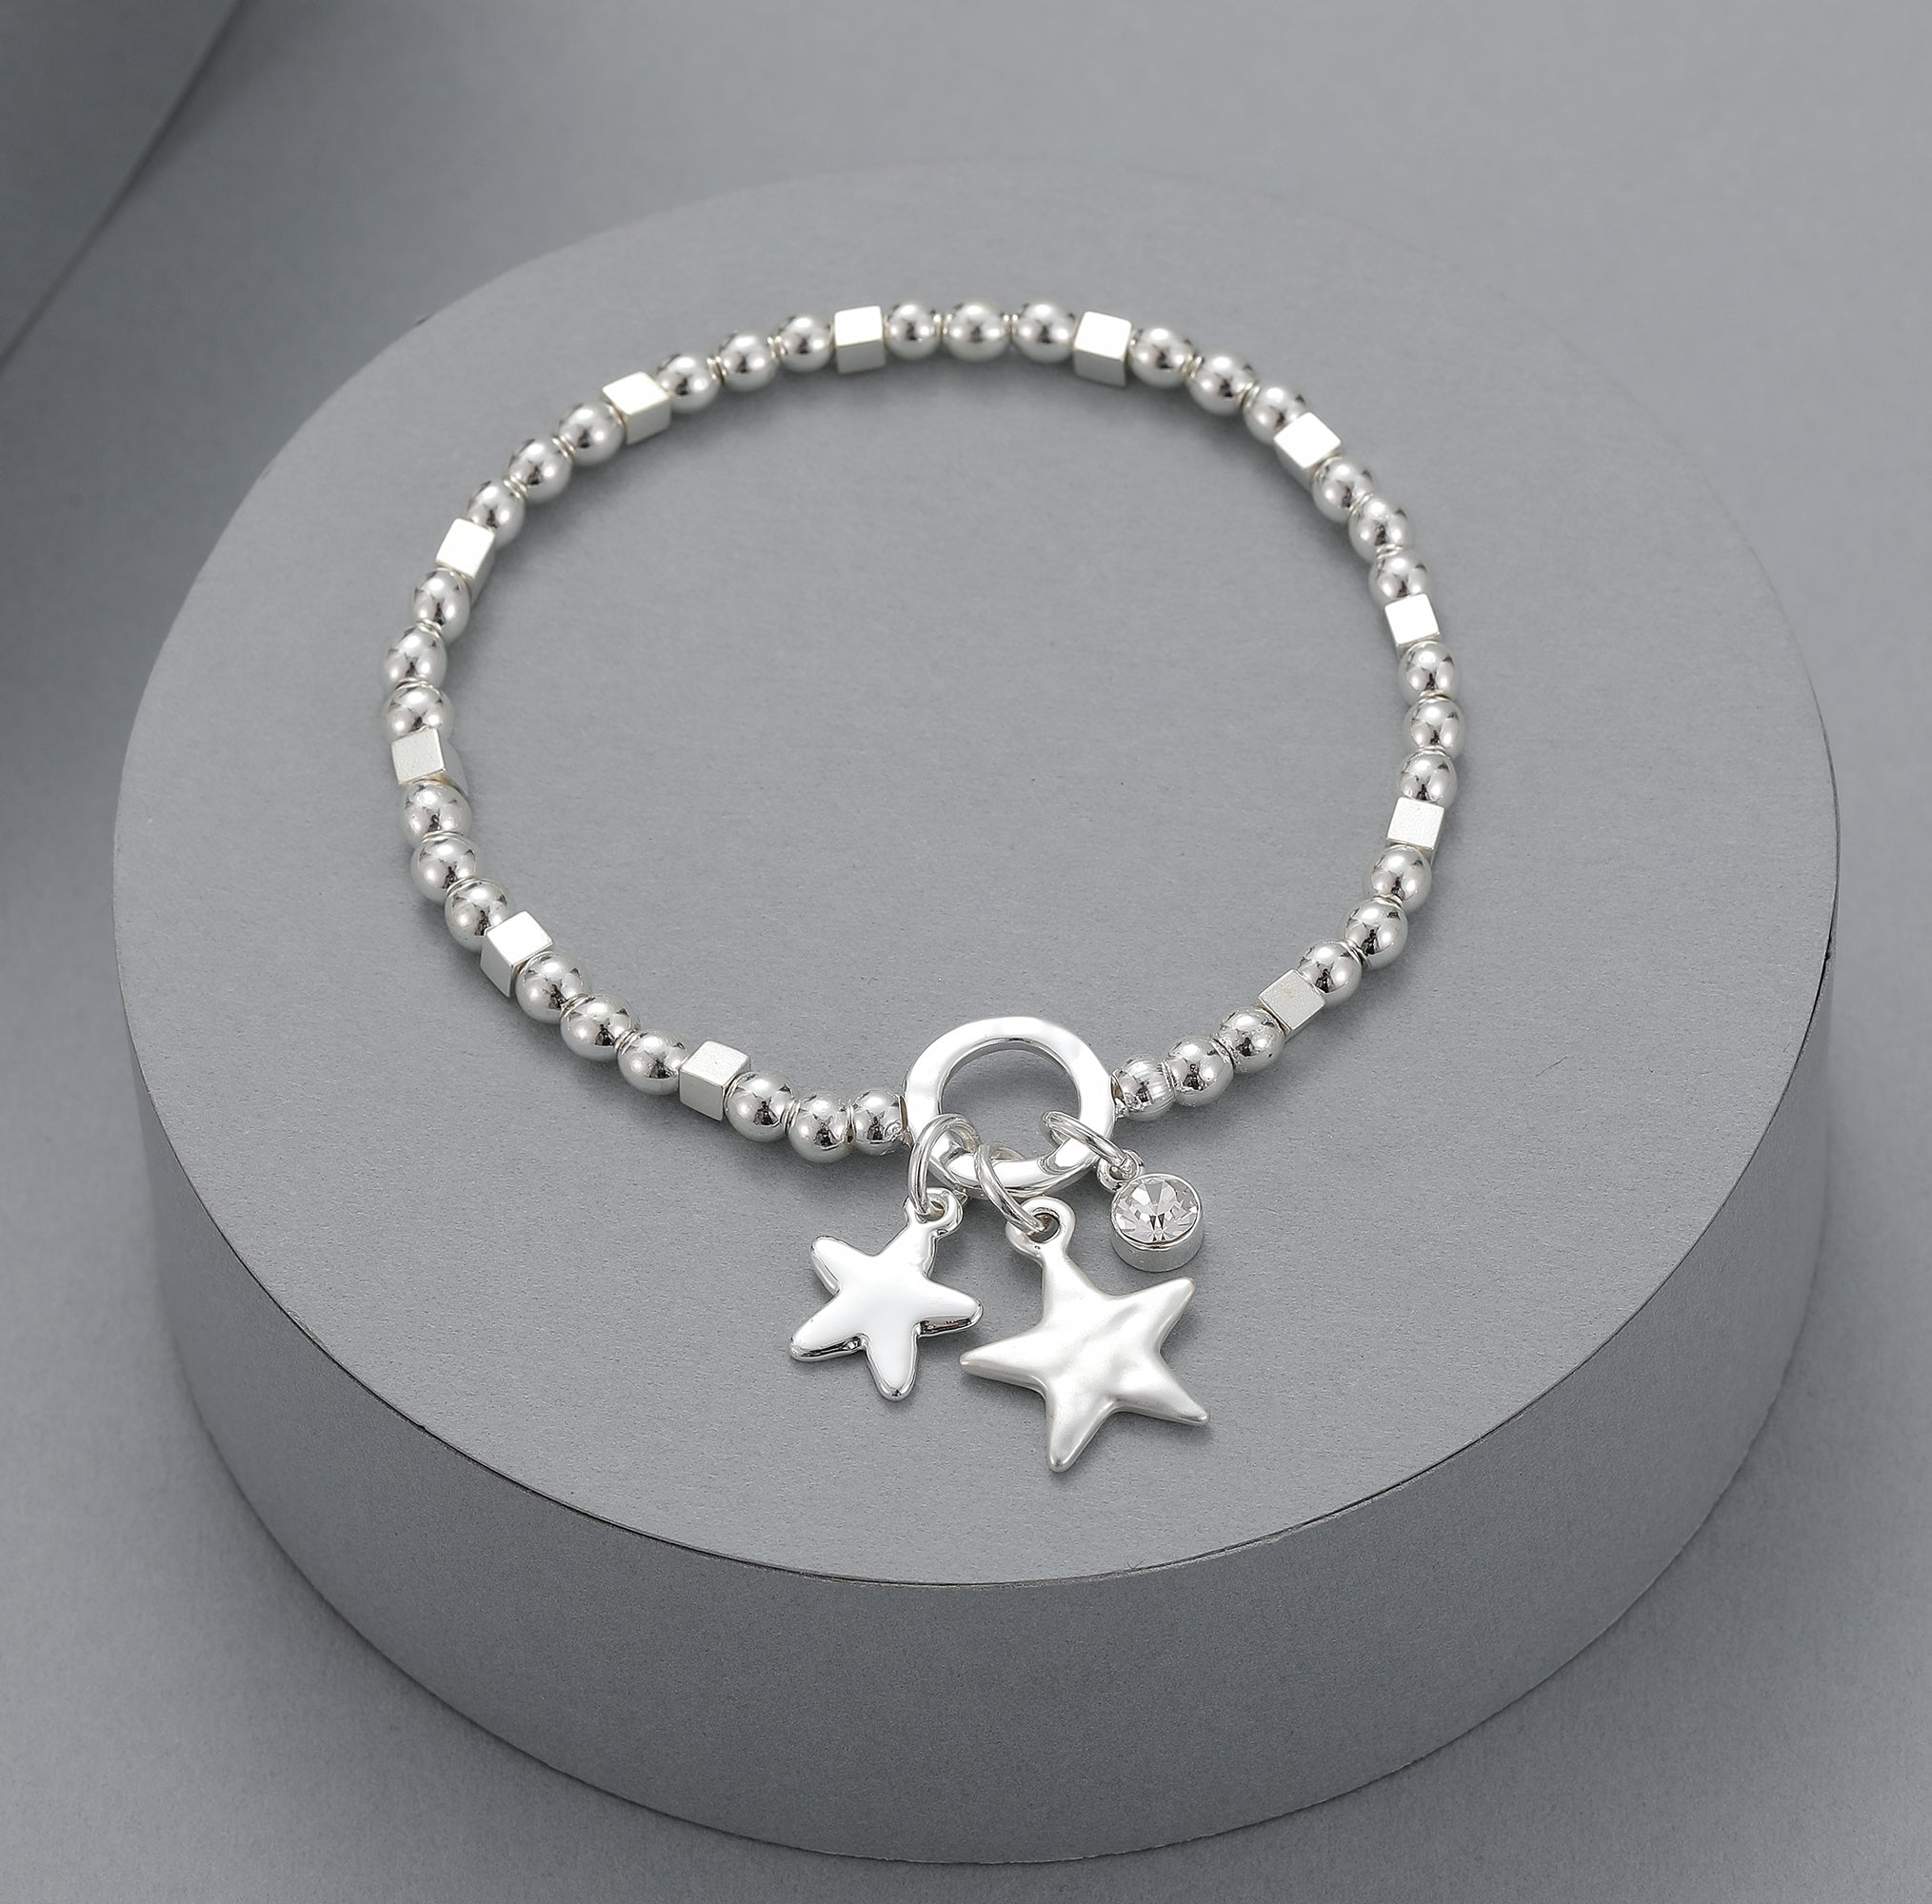 Silver elasticated bracelet with star motif